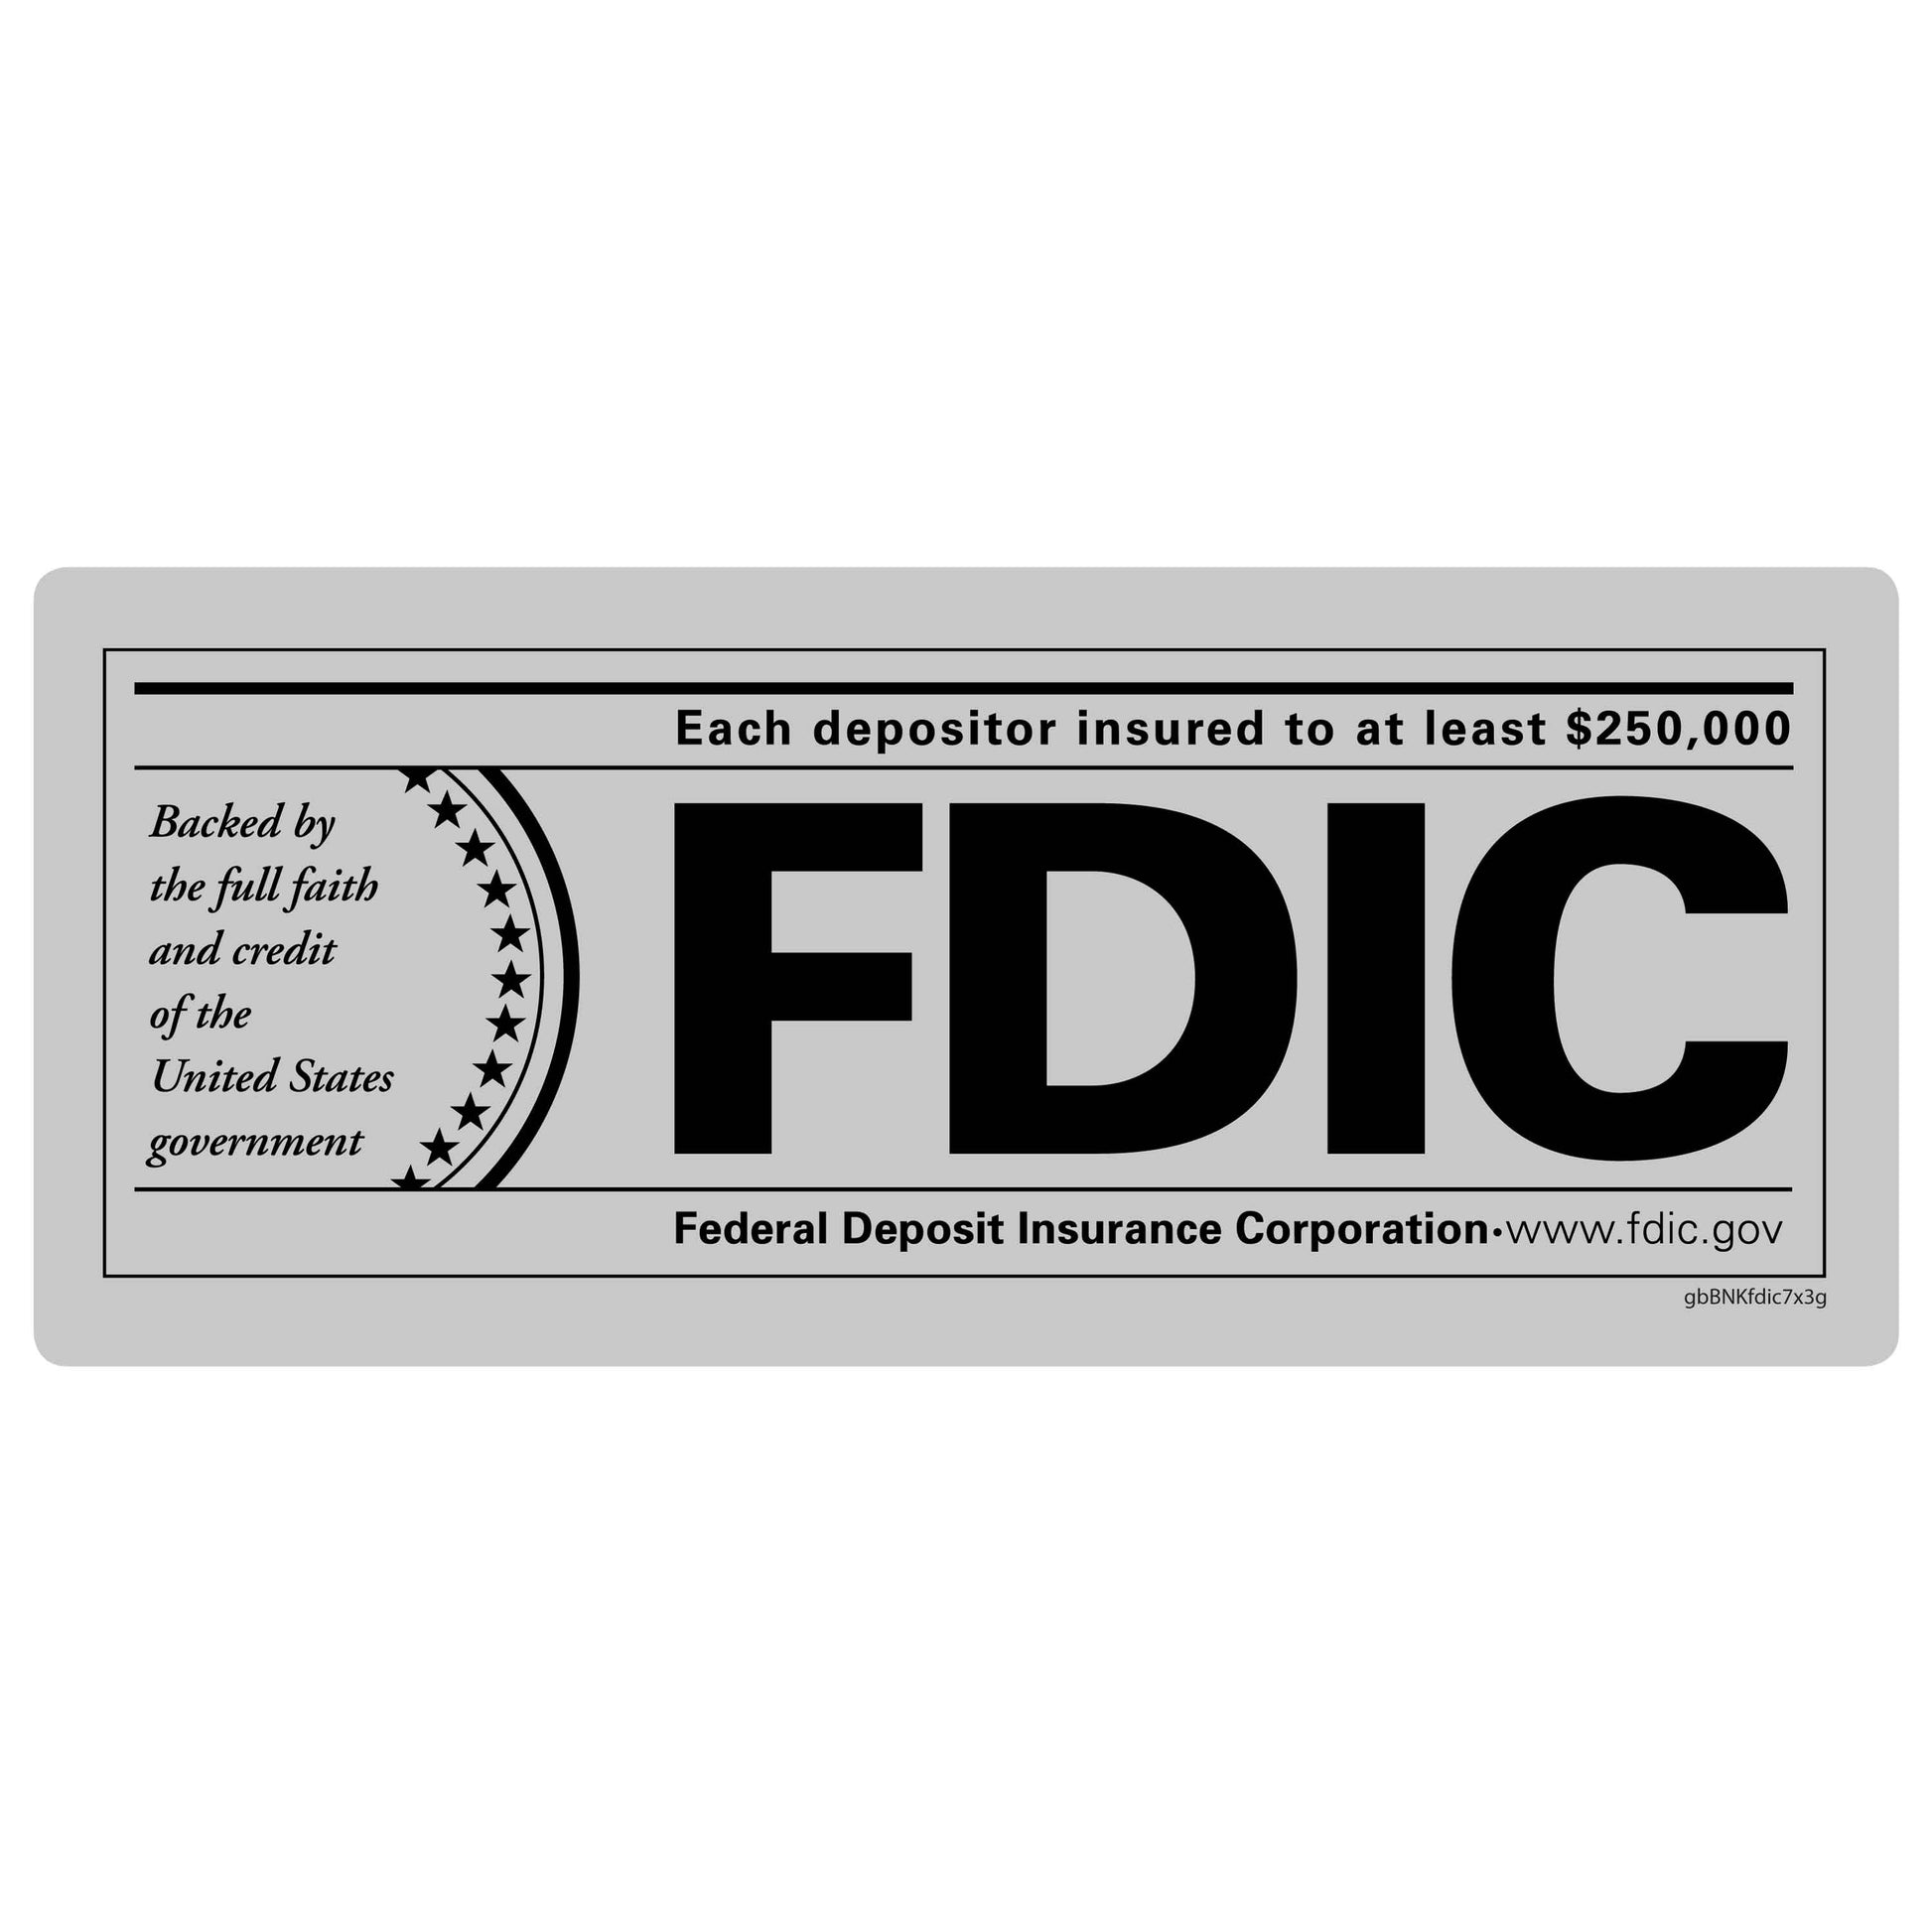 FDIC Gray and Black Decal. 7 inches by 3 inches in size.